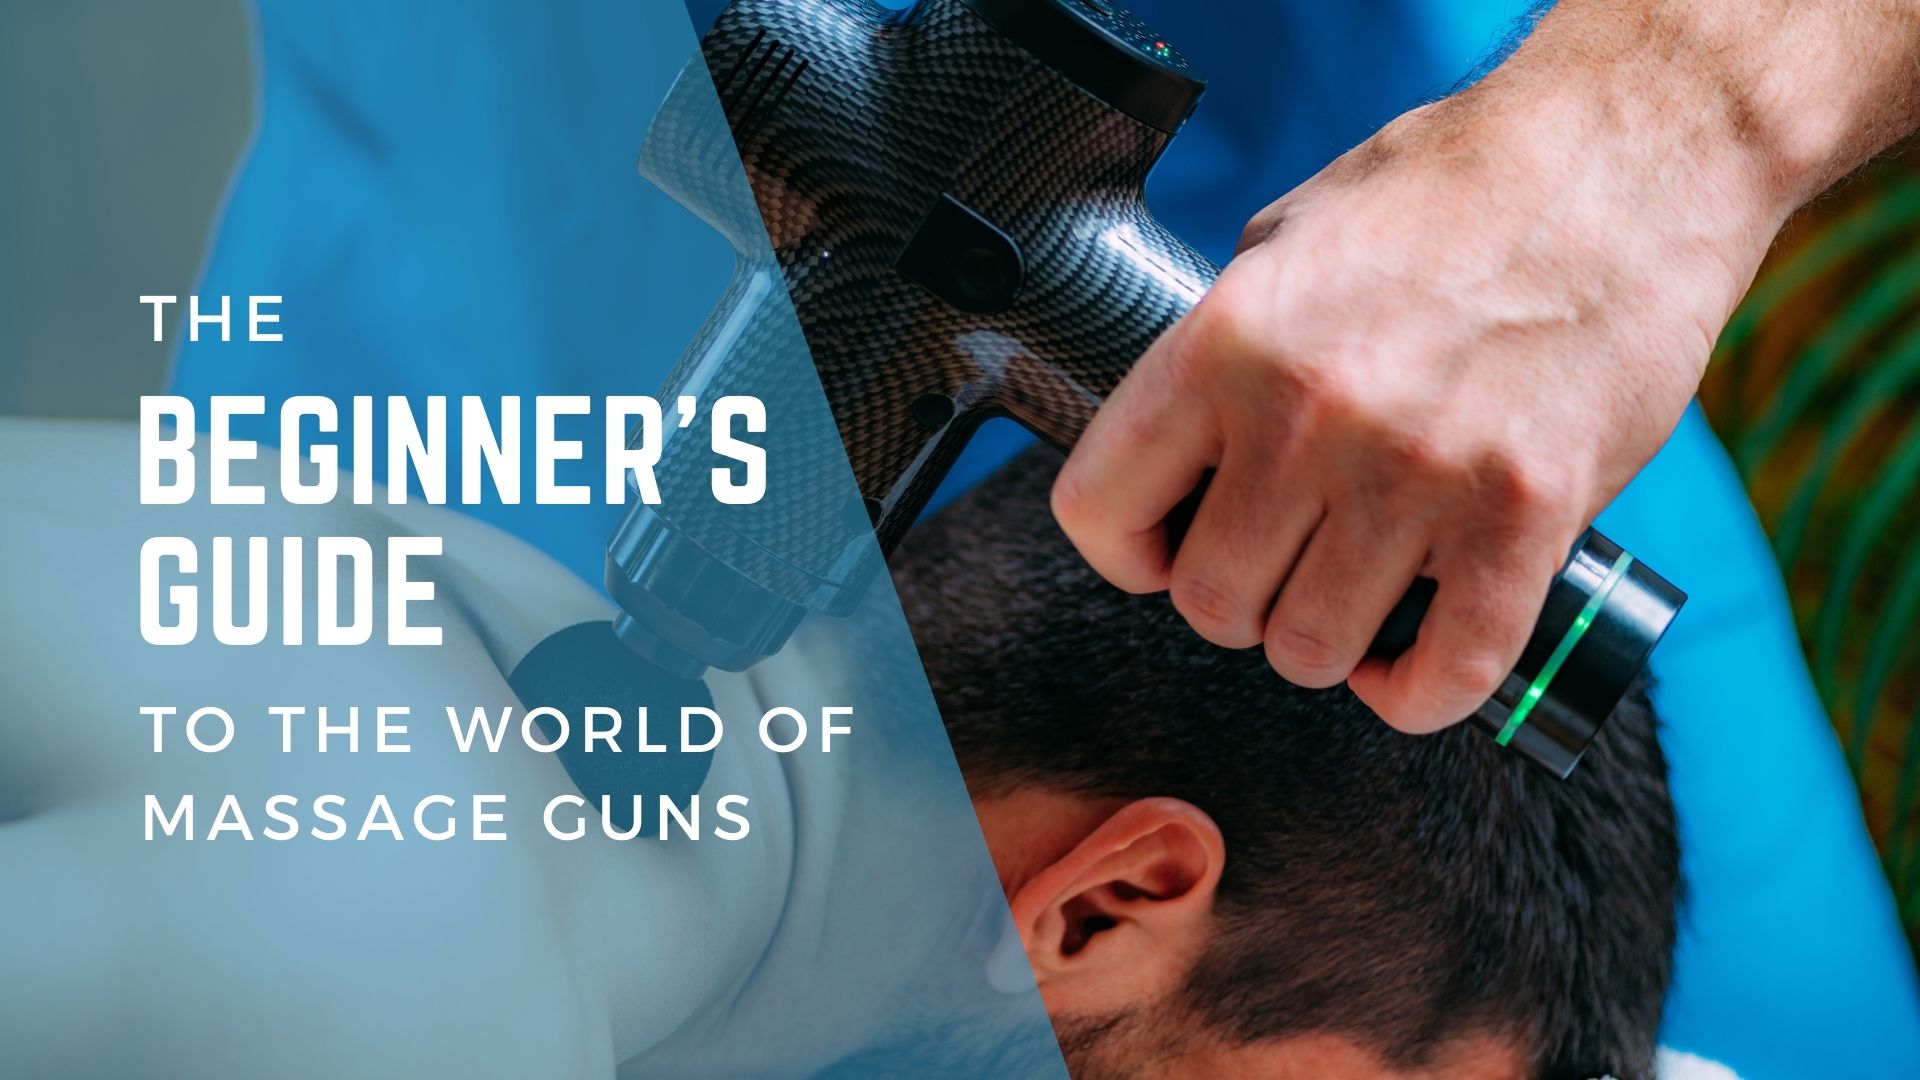 The Beginner’s Guide to the World of Massage Guns